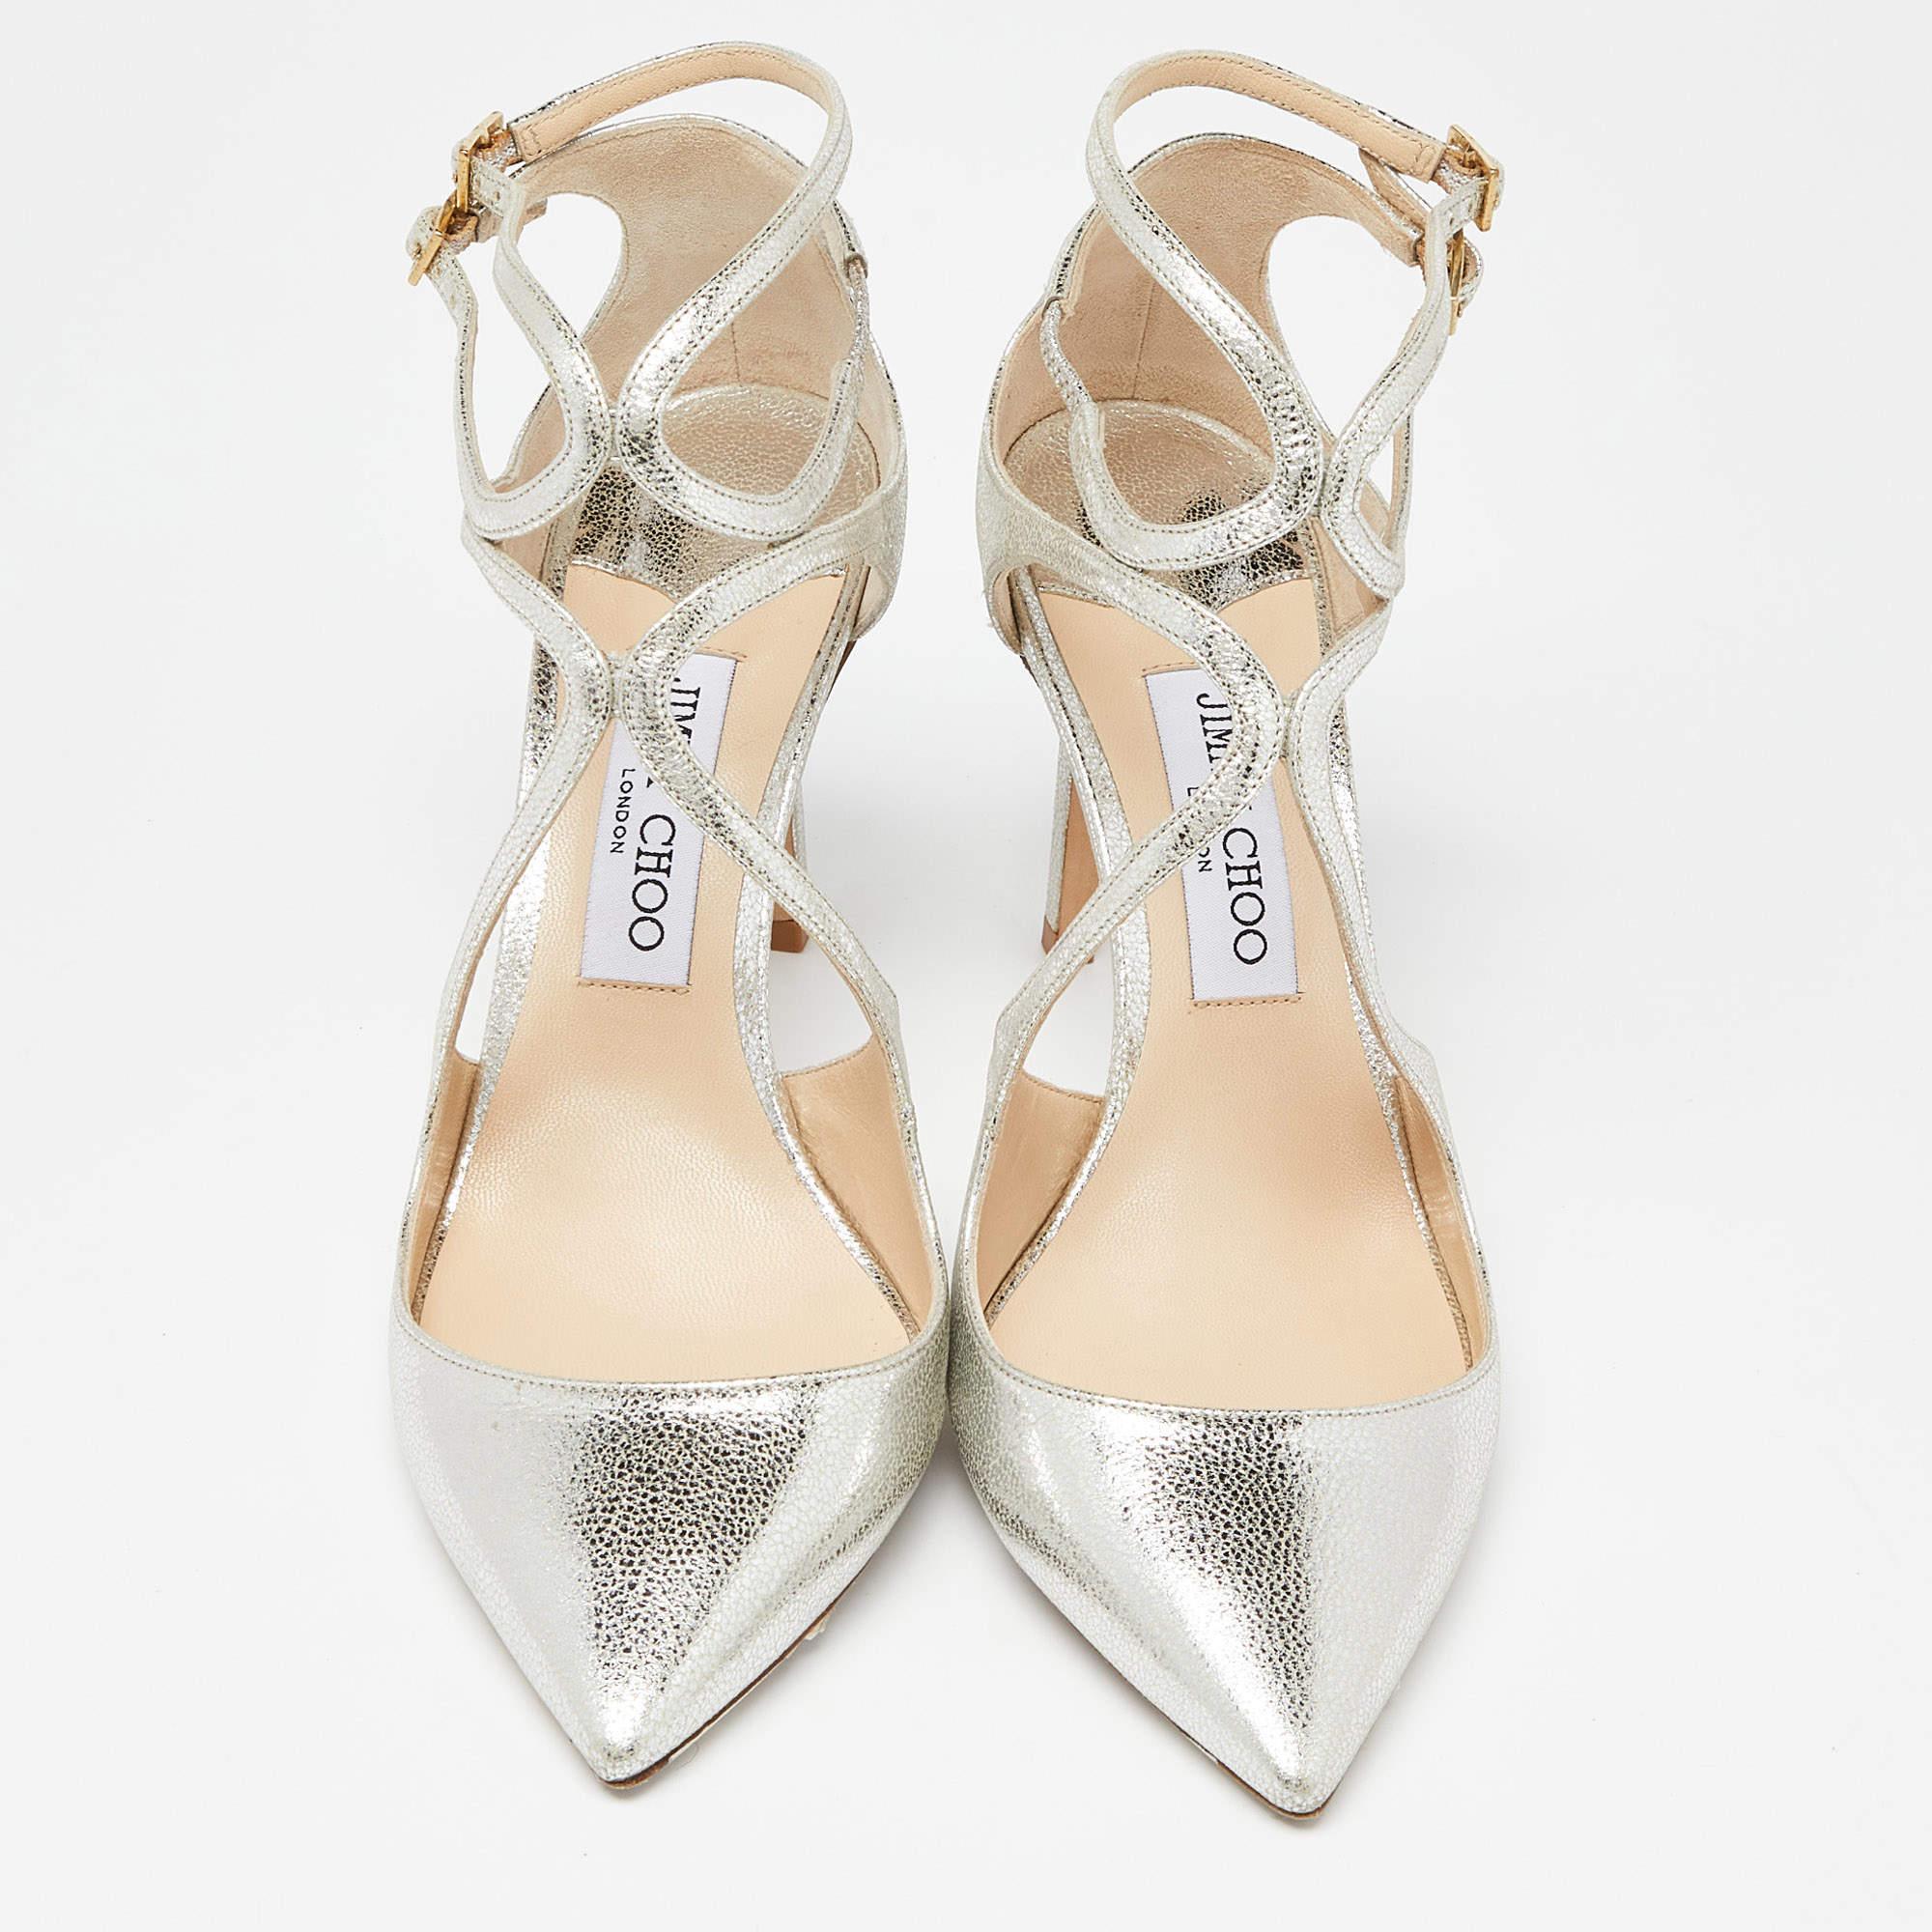 Jimmy Choo Gold Leather Lancer 85 Pointed Toe Pumps Size 40 In Good Condition For Sale In Dubai, Al Qouz 2